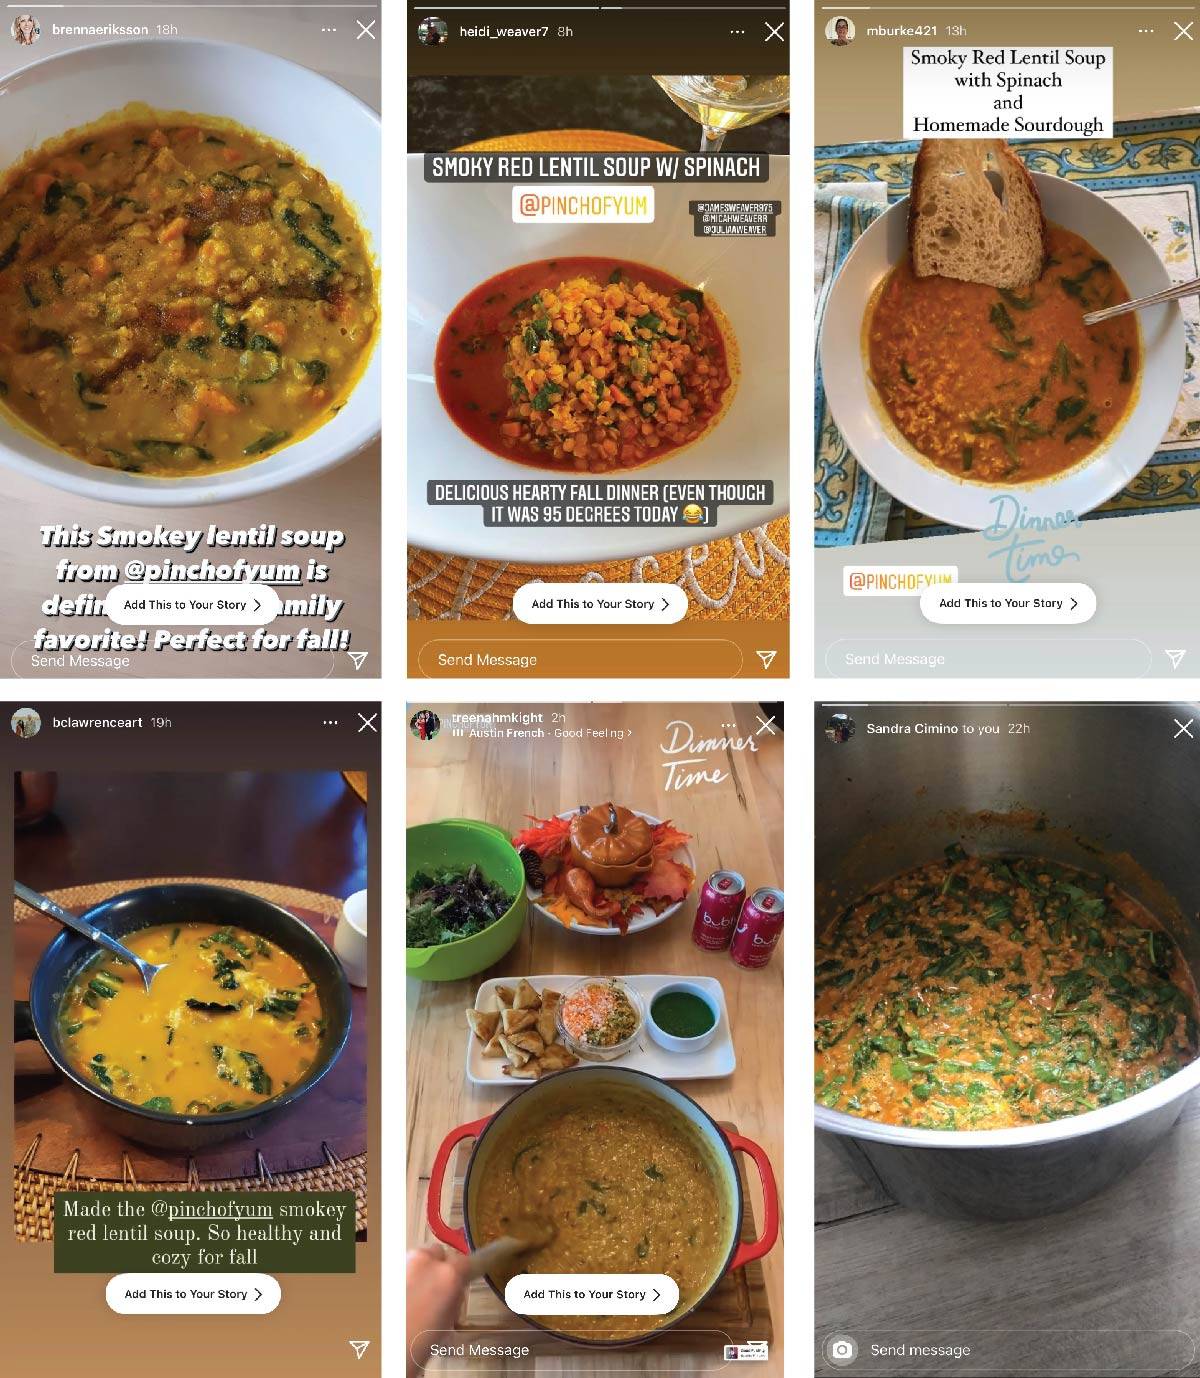 Instagram screenshots of POY readers making the Smoky Red Lentil Soup recipe.